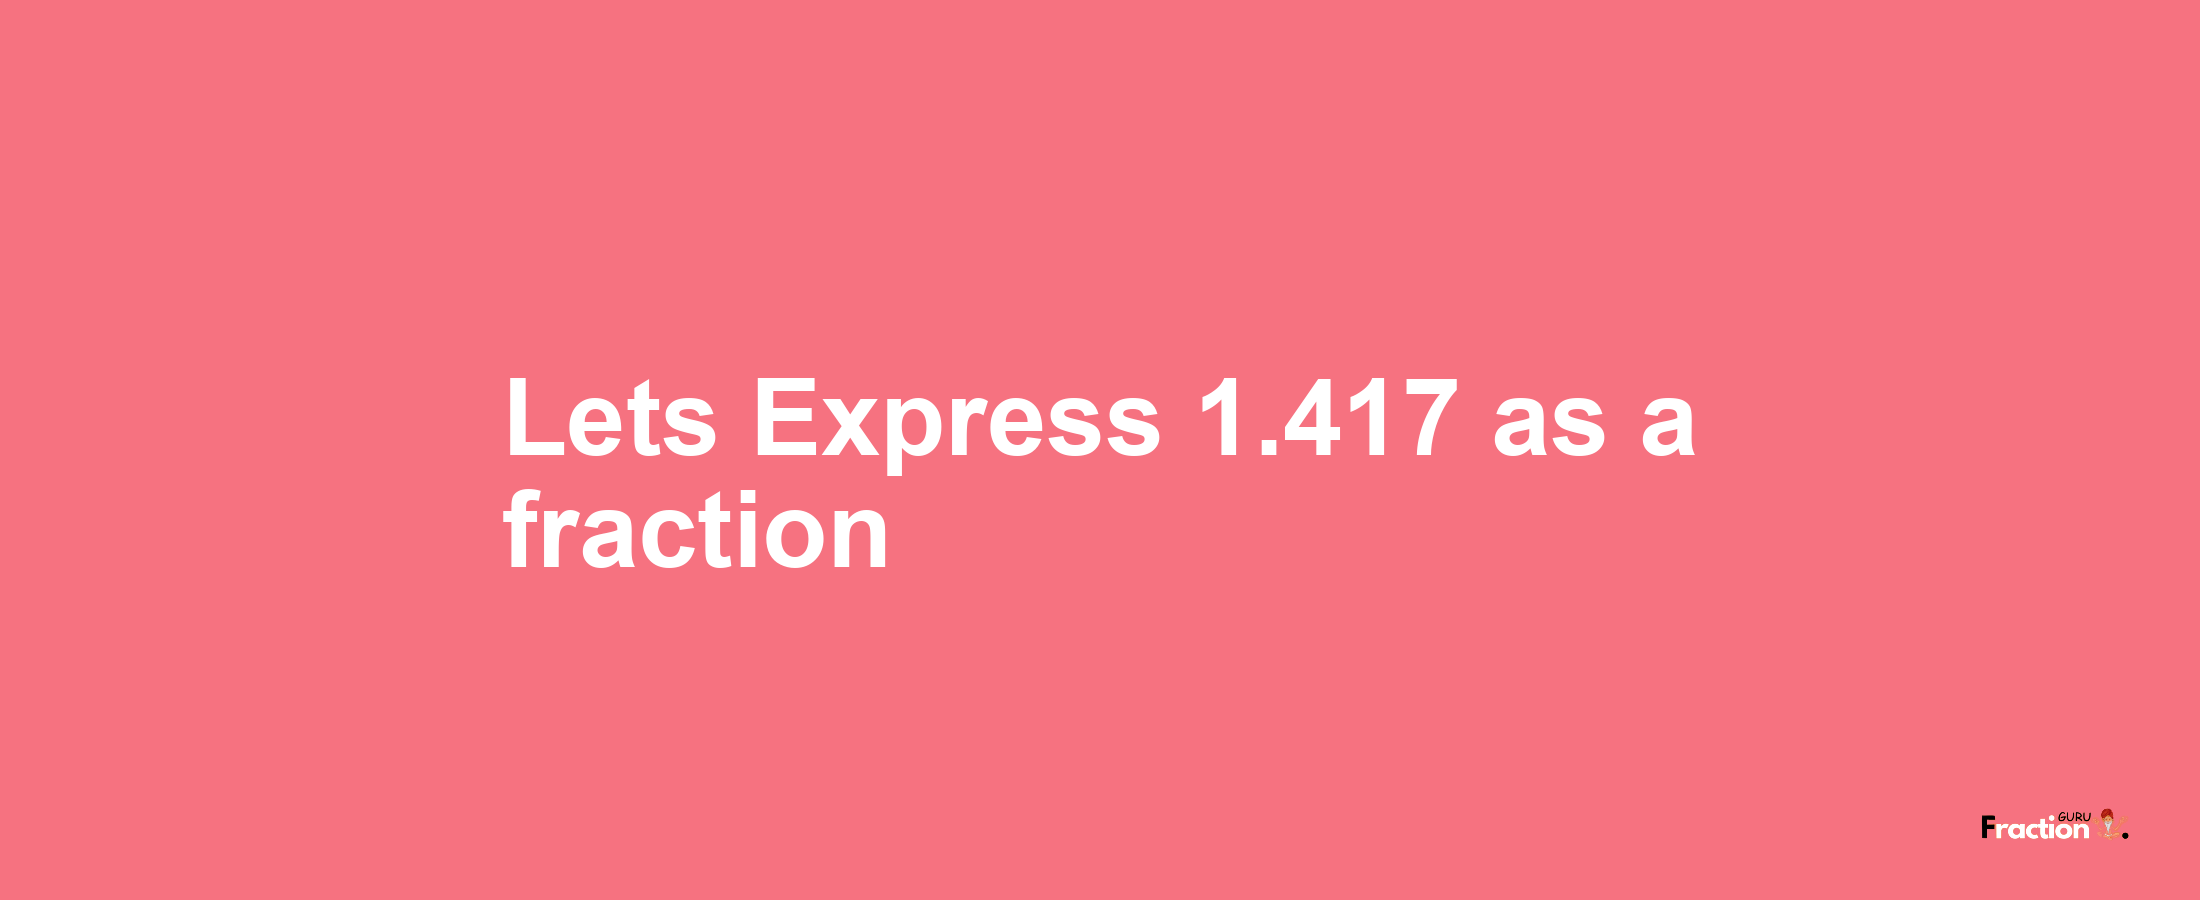 Lets Express 1.417 as afraction